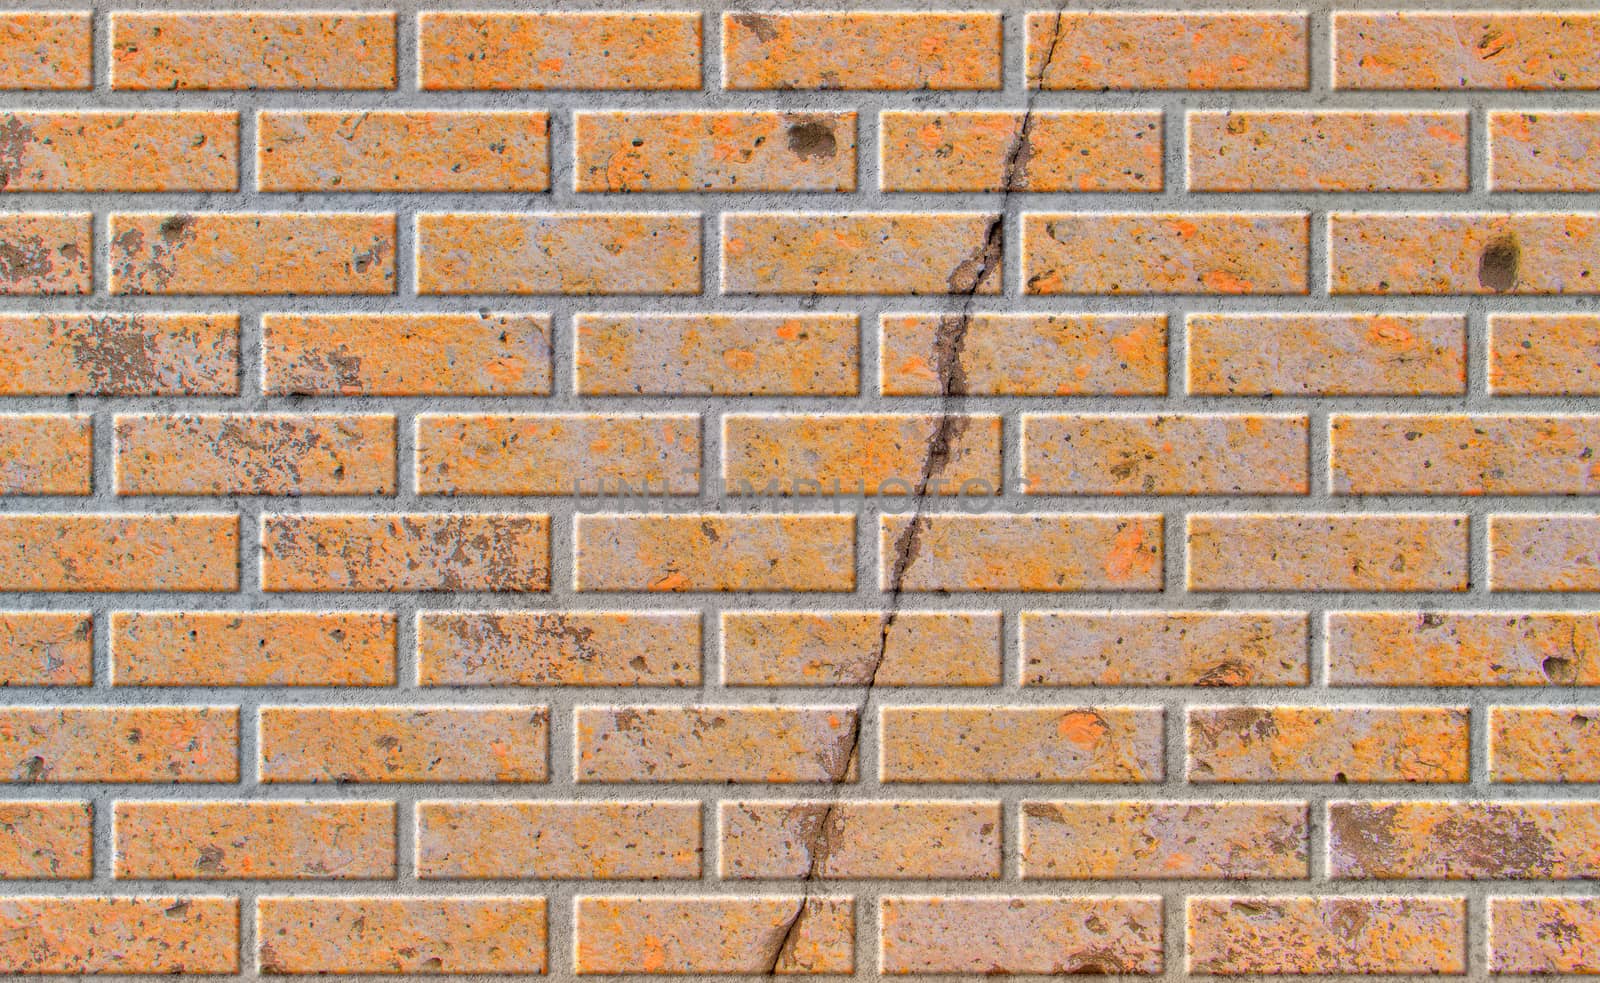 Brick wall illustration by Visual-Content